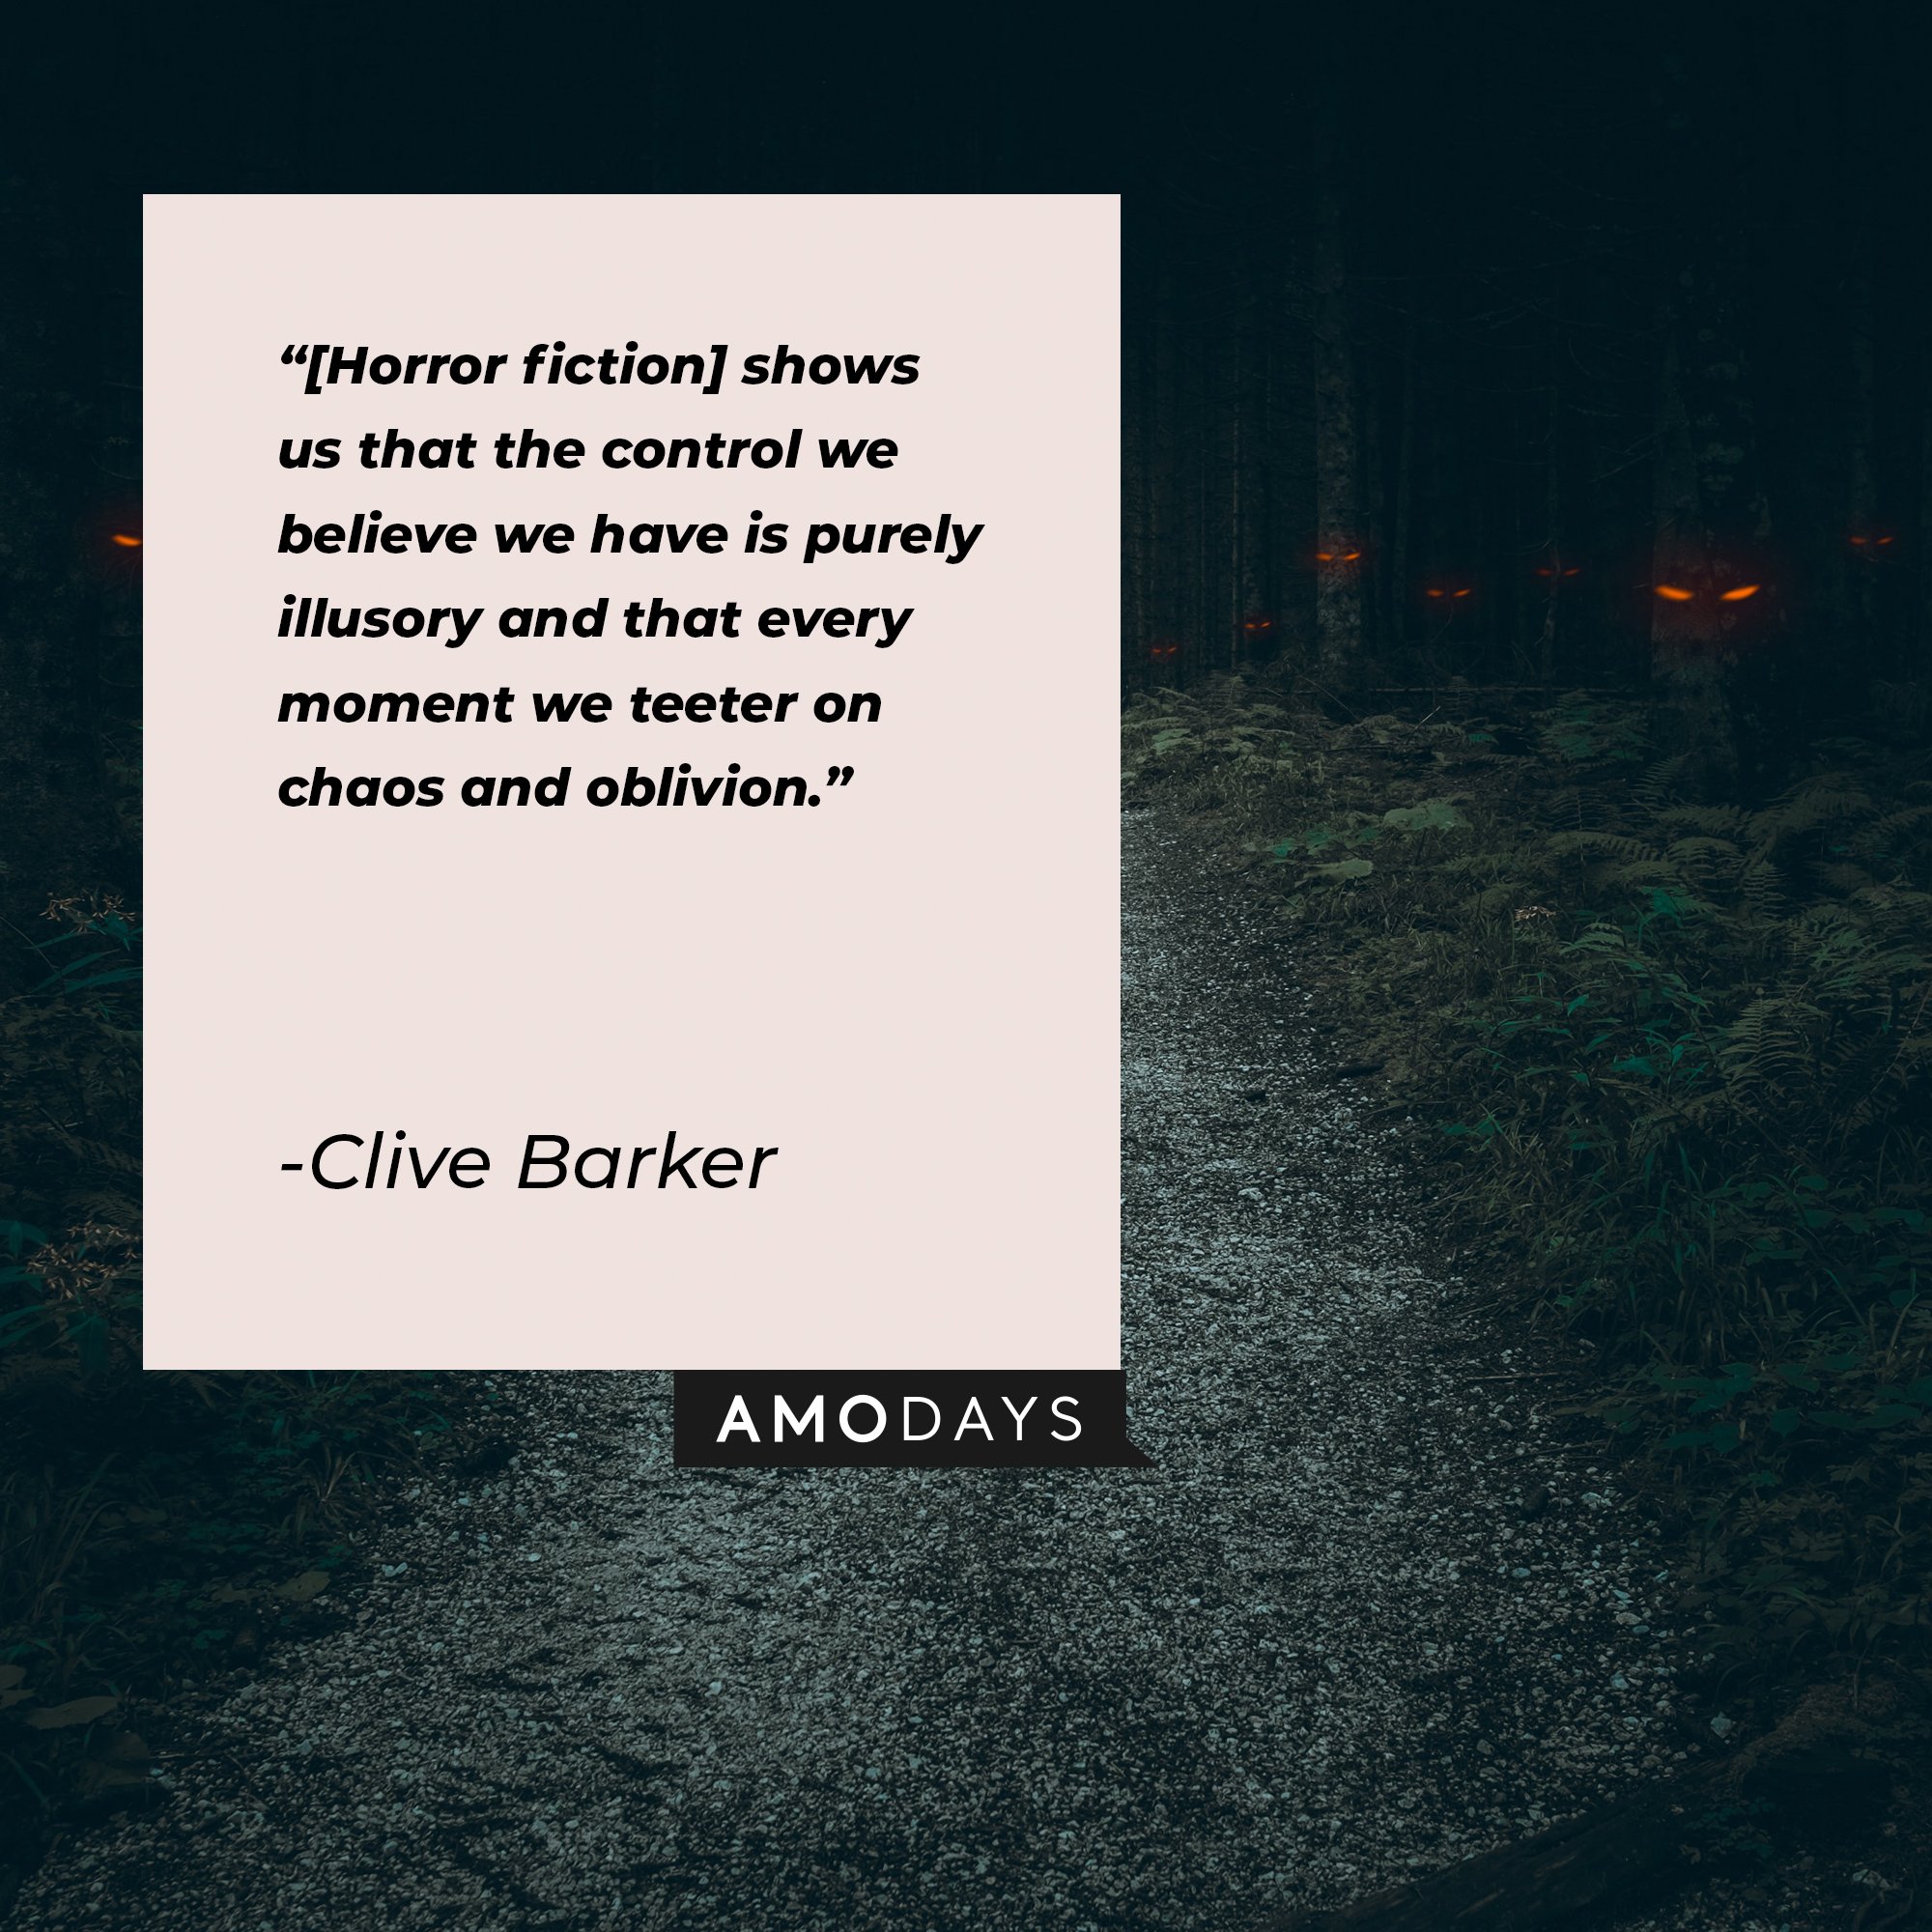 Clive Barker’s quote: "[Horror fiction] shows us that the control we believe we have is purely illusory and that every moment we teeter on chaos and oblivion." | Image: AmoDays